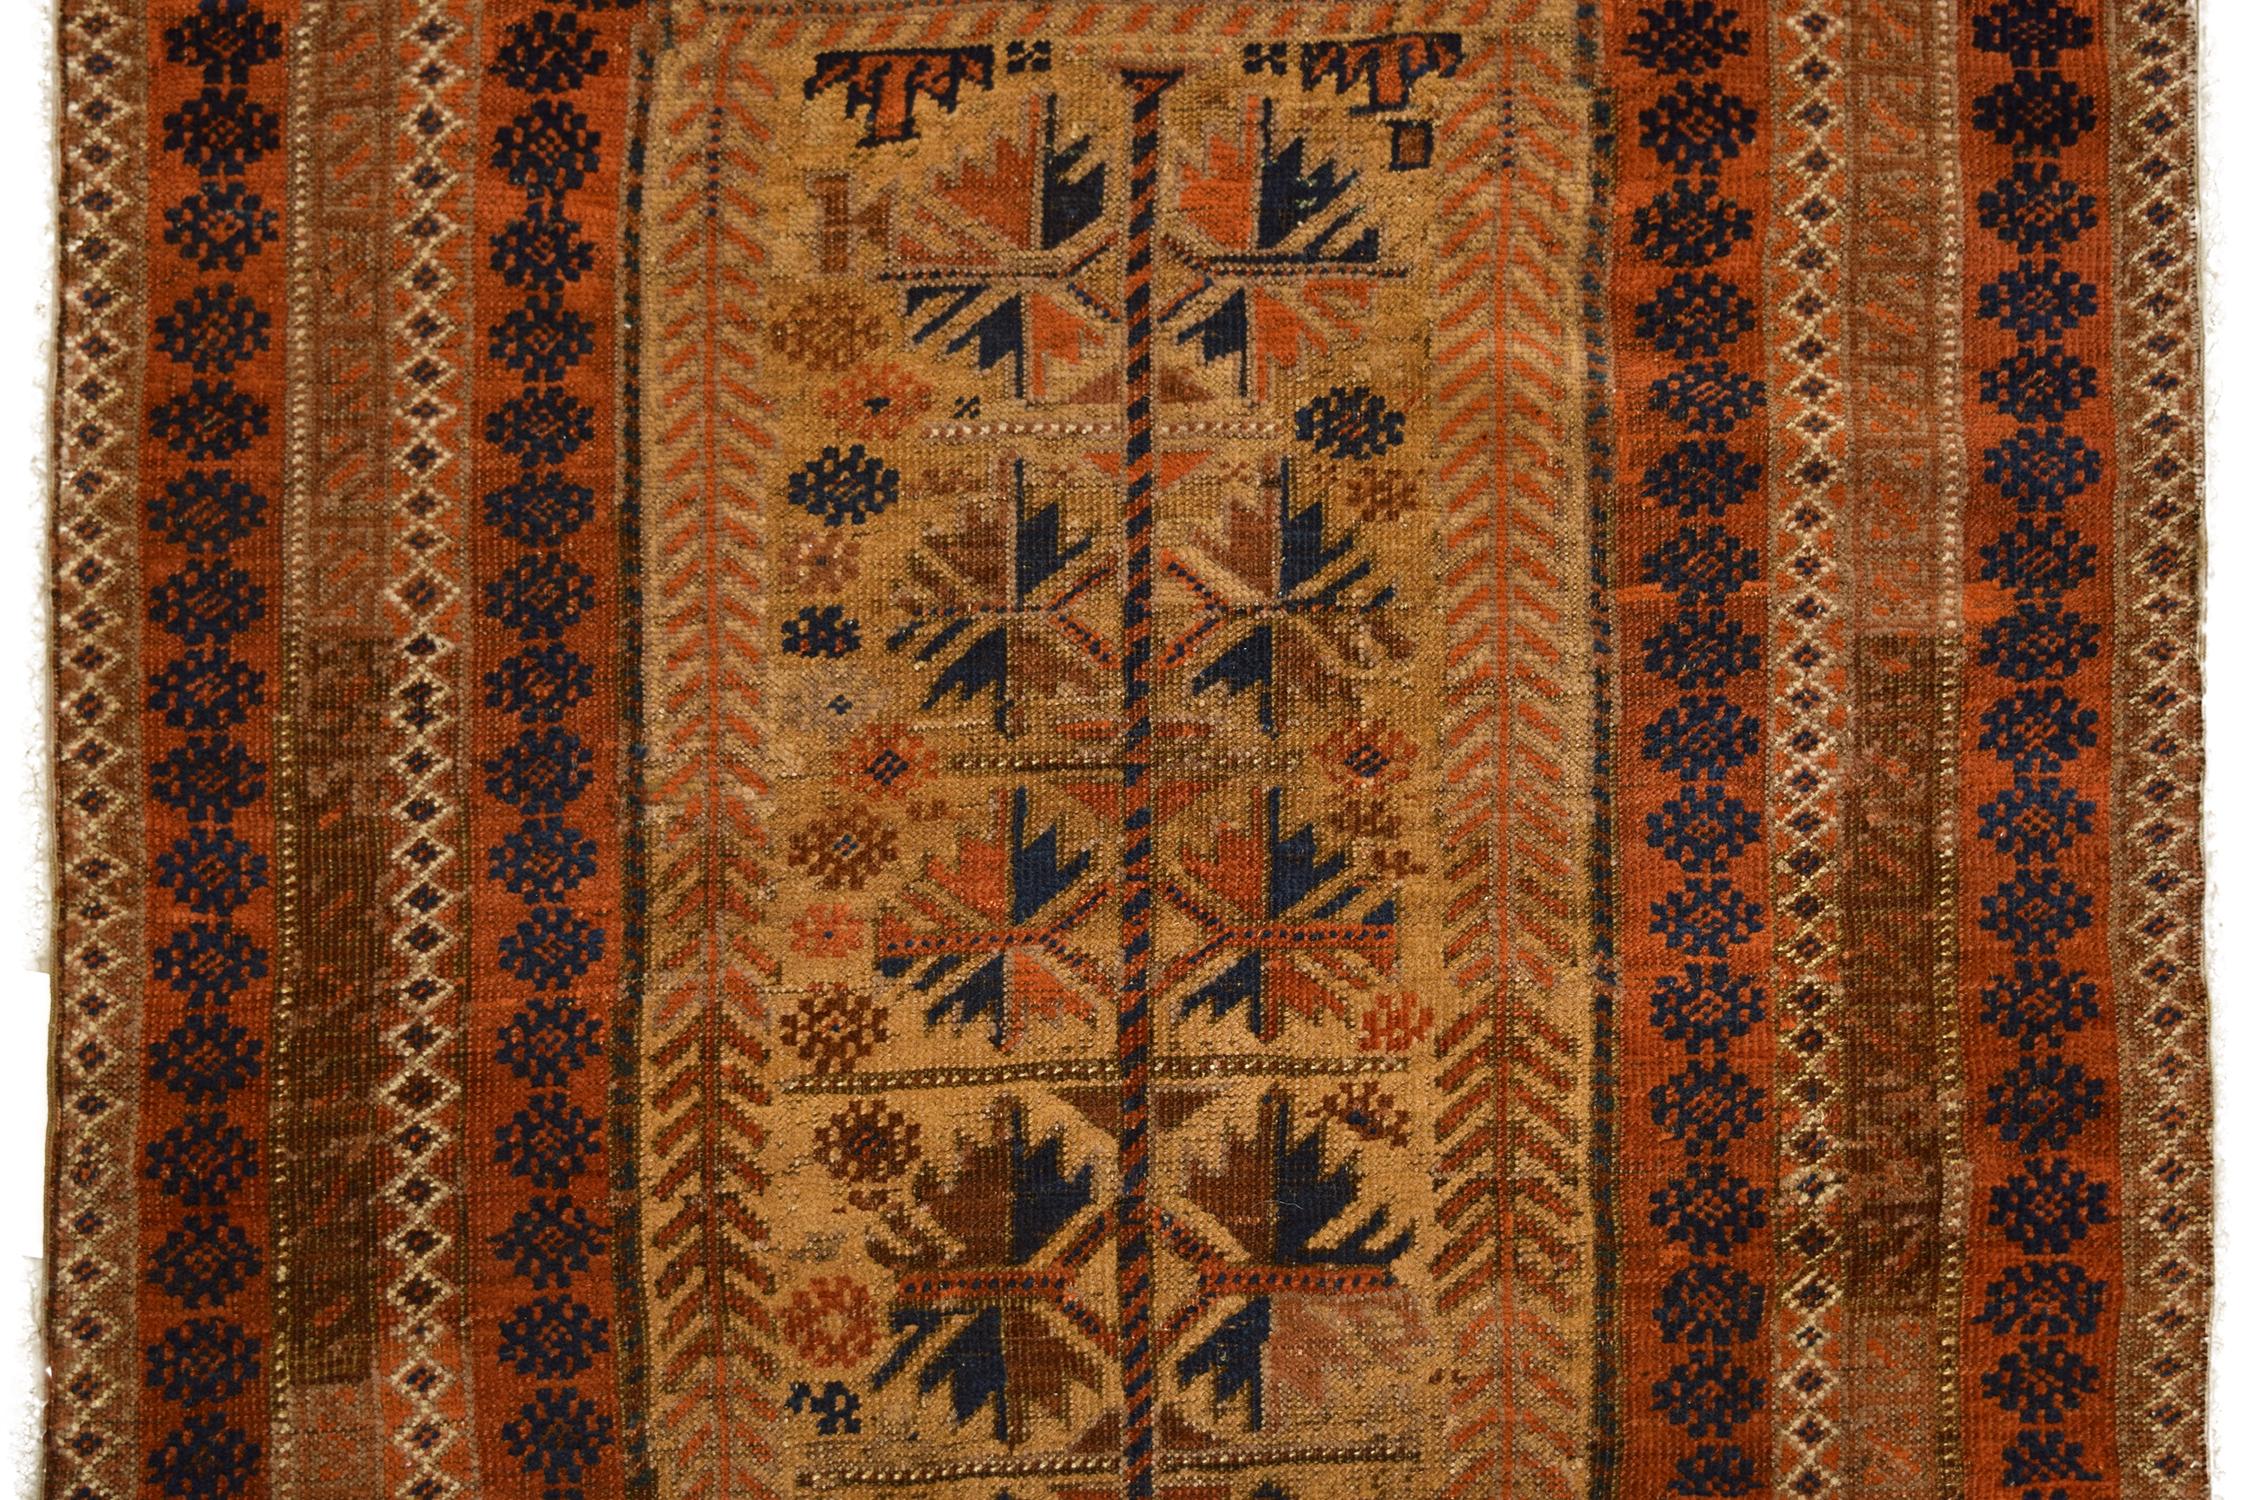 Measuring 2’5” x 3’5”, this small and modest antique Balouchi carpet was crafted circa 1870 and belongs to Orley Shabahang’s Antique collection. Using only neutral tones and blue, this rug utilizes a traditional Persian weave, resulting in a soft